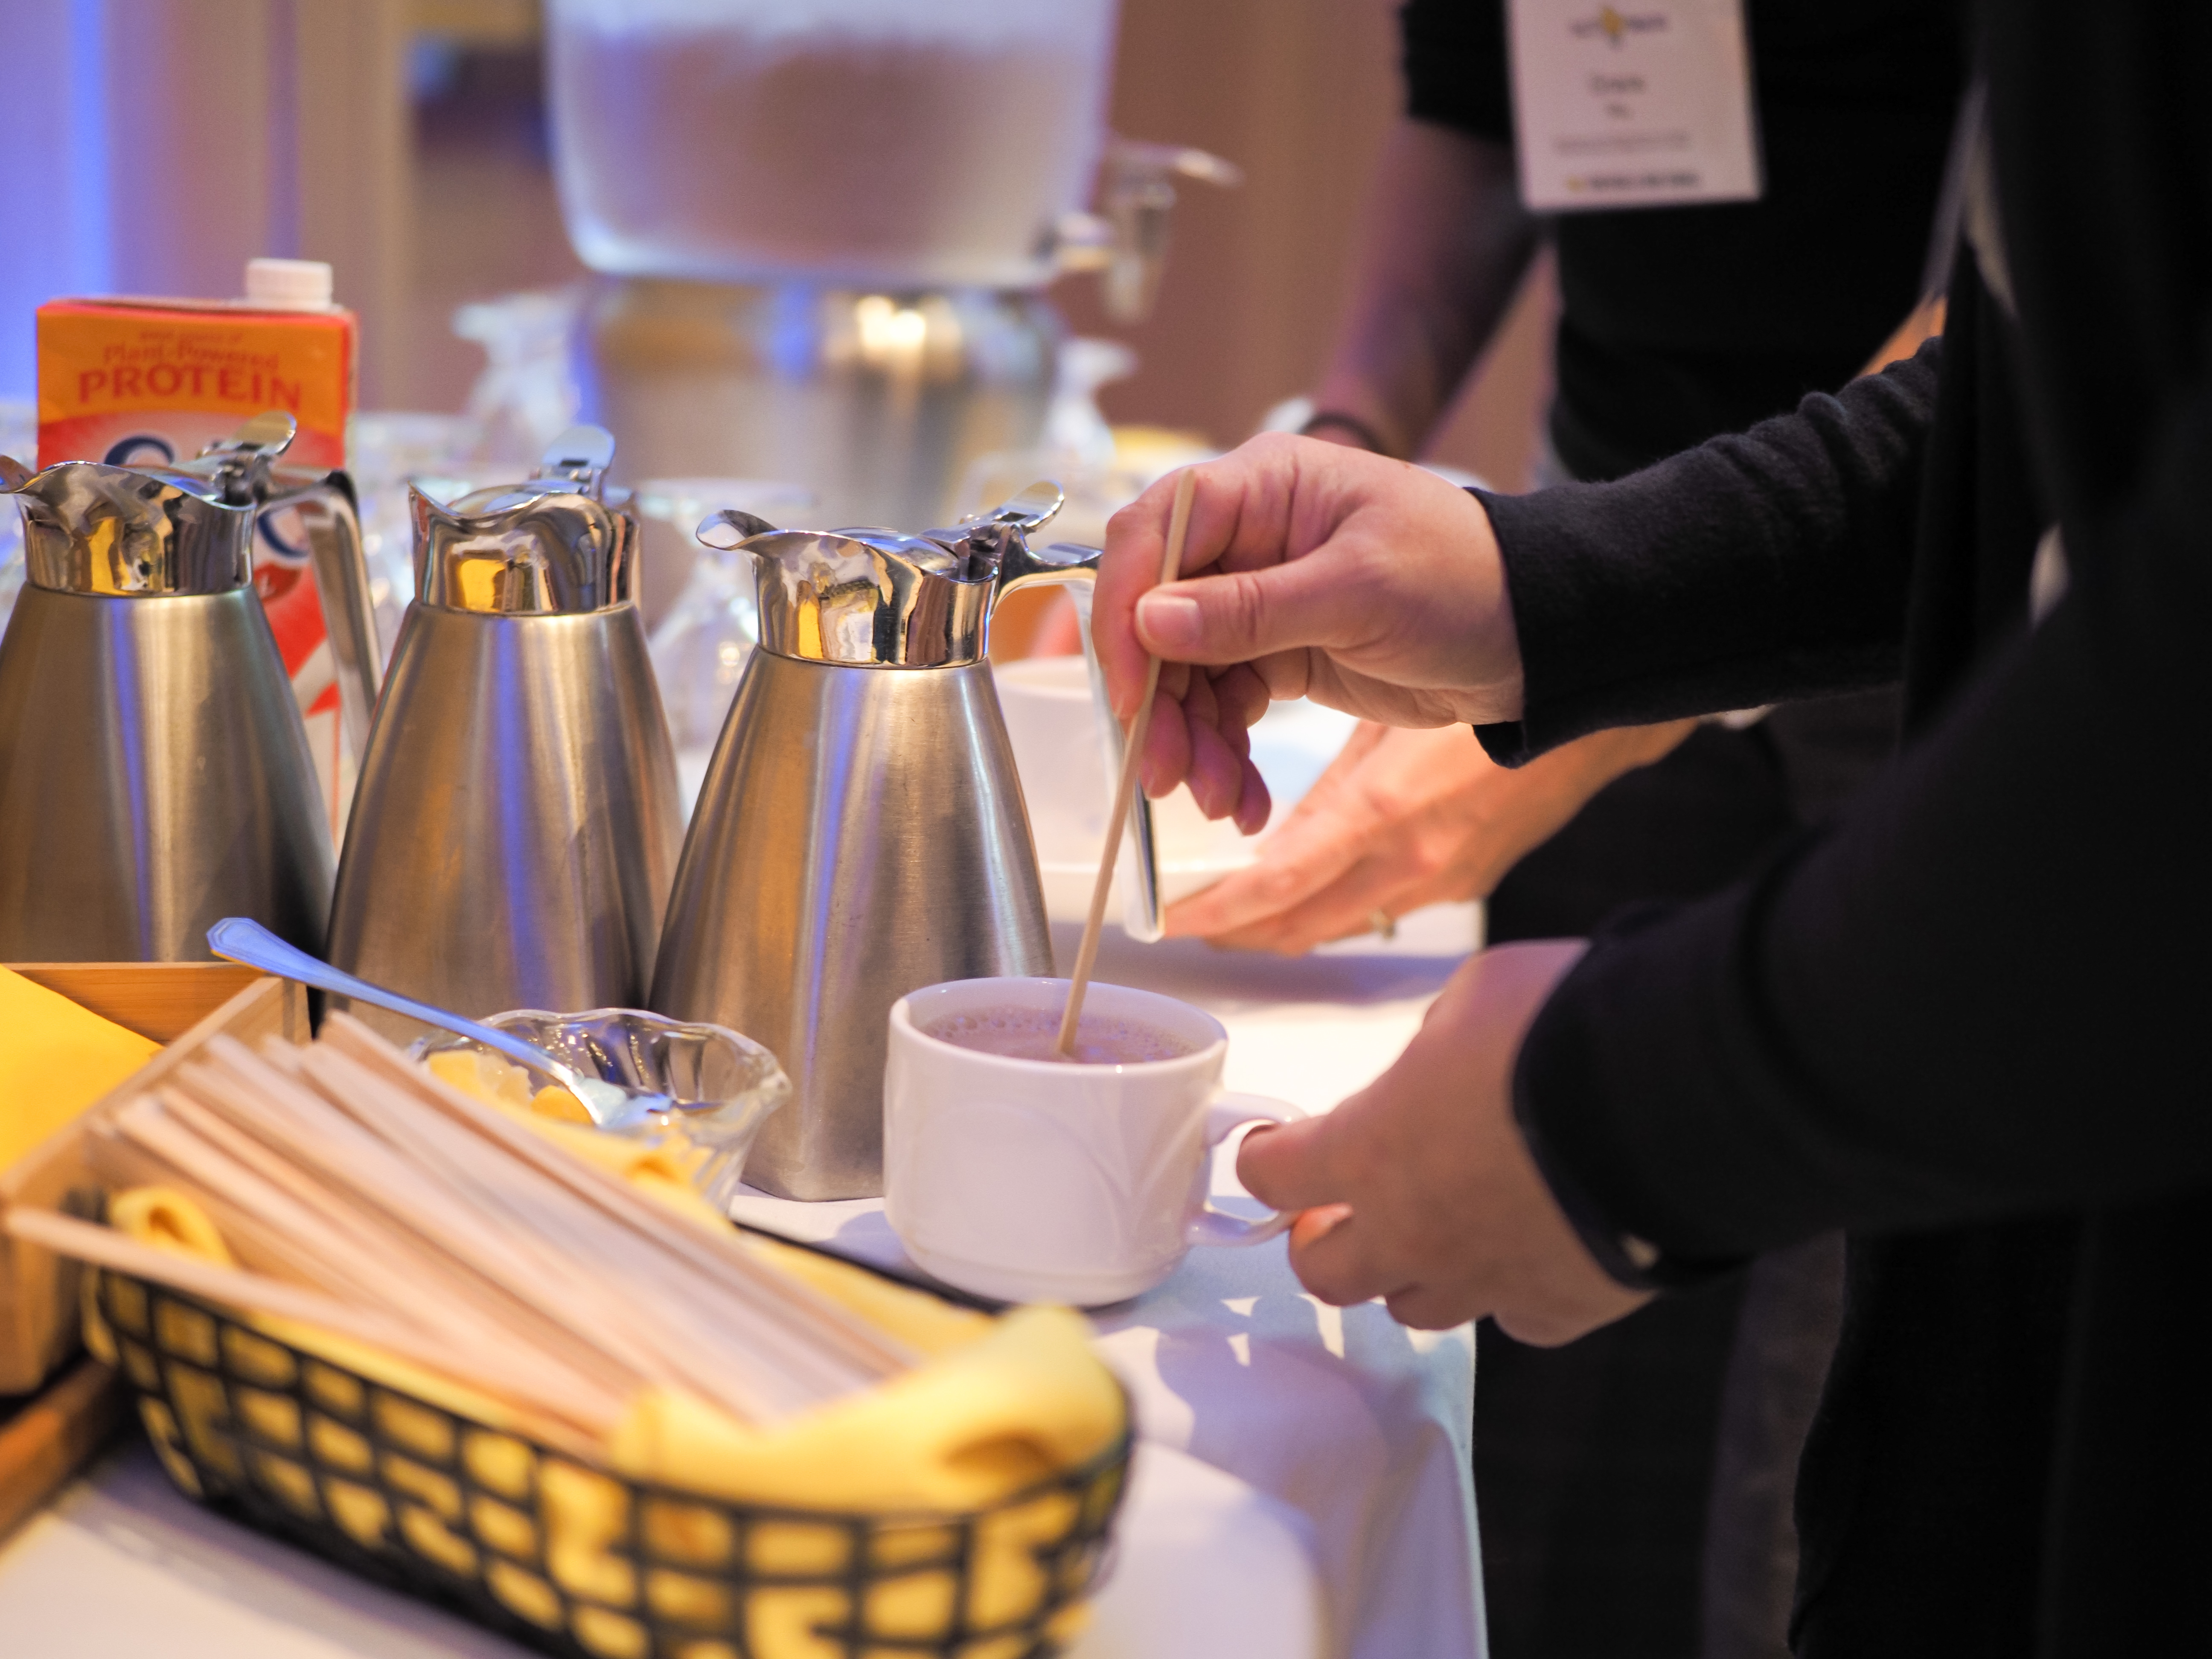 People serving coffee with wood stirrers